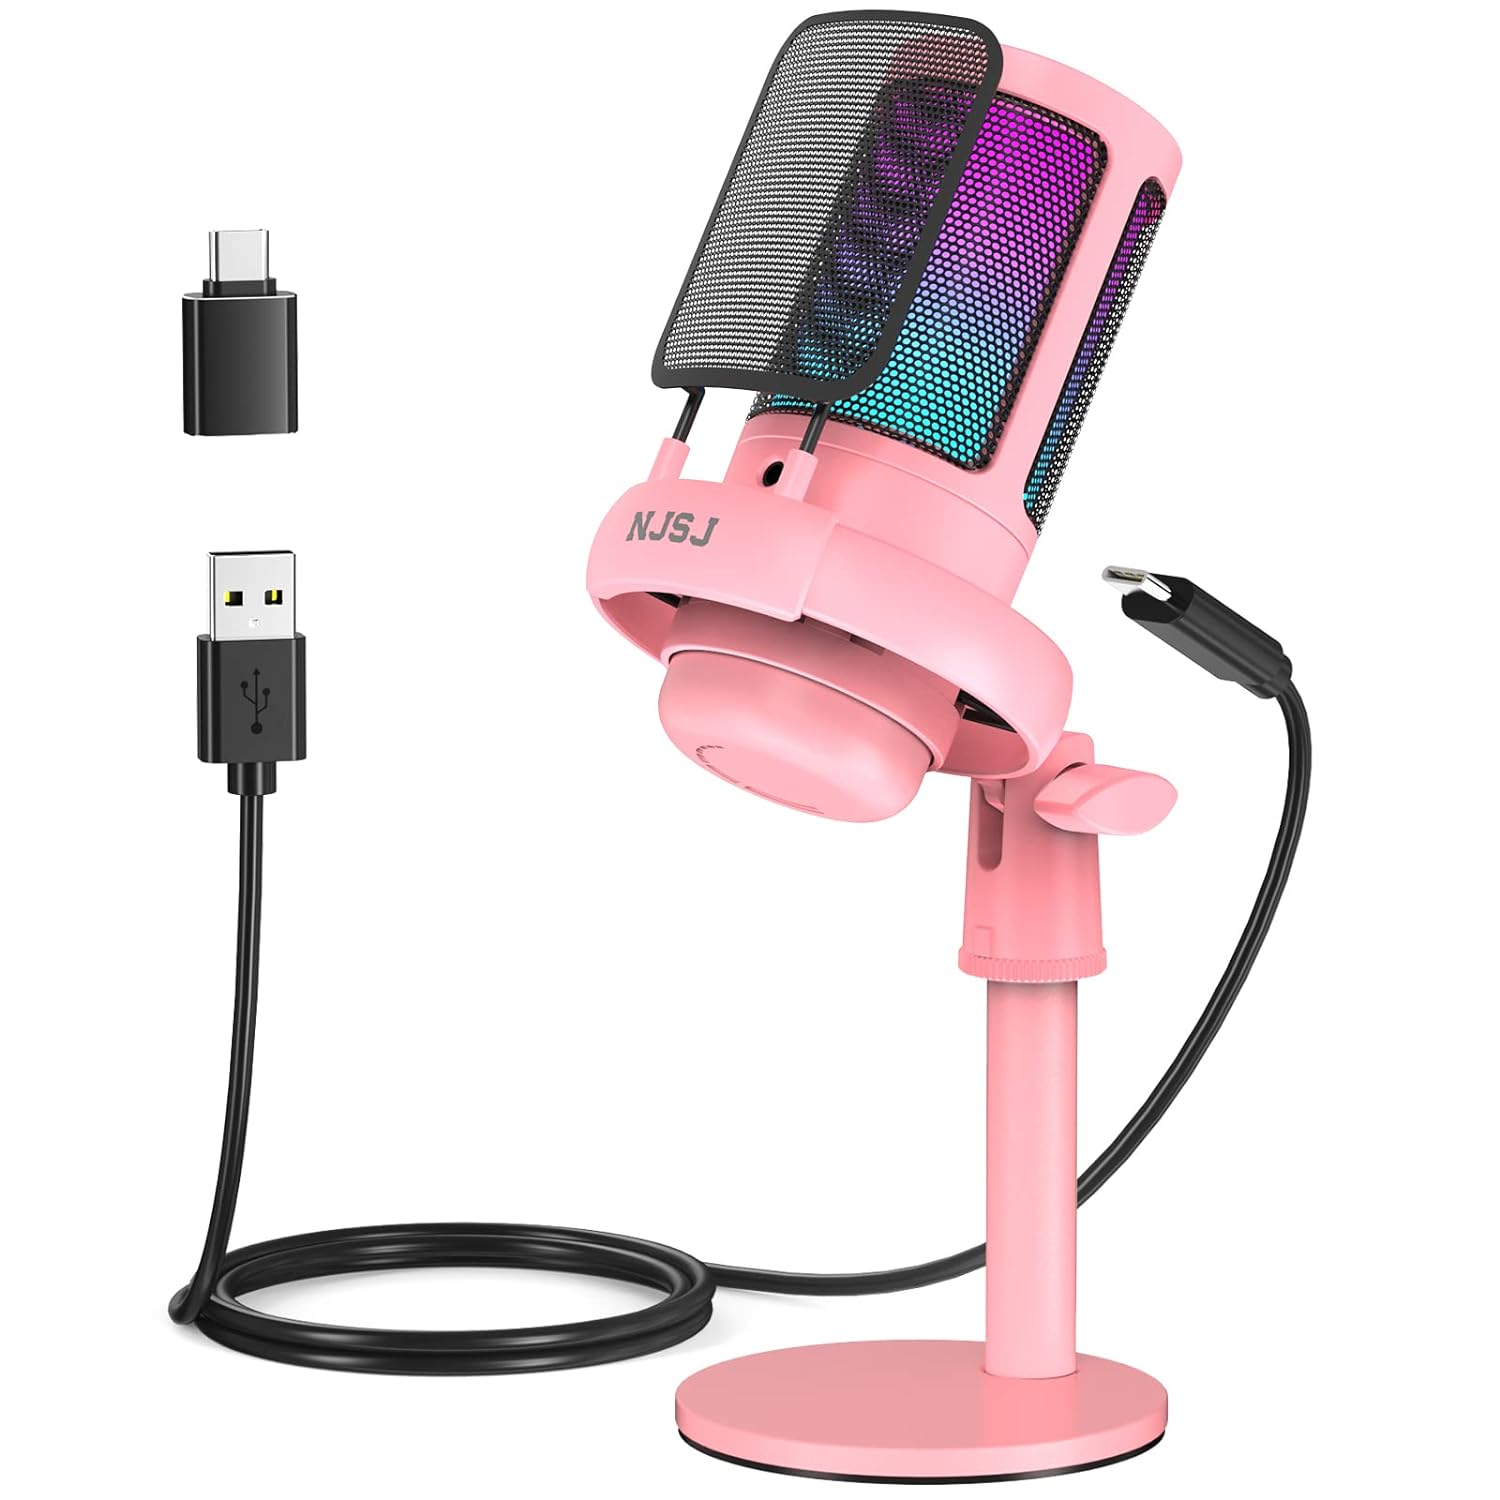 NJSJ USB Microphone for PC, Gaming Mic for PS4/ PS5/ Mac/Phone,Condenser Microphone with Touch Mute, RGB Lighting,Gain knob & Monitoring Jack for Streaming,Podcasting (with Desktop Stand, Pink)